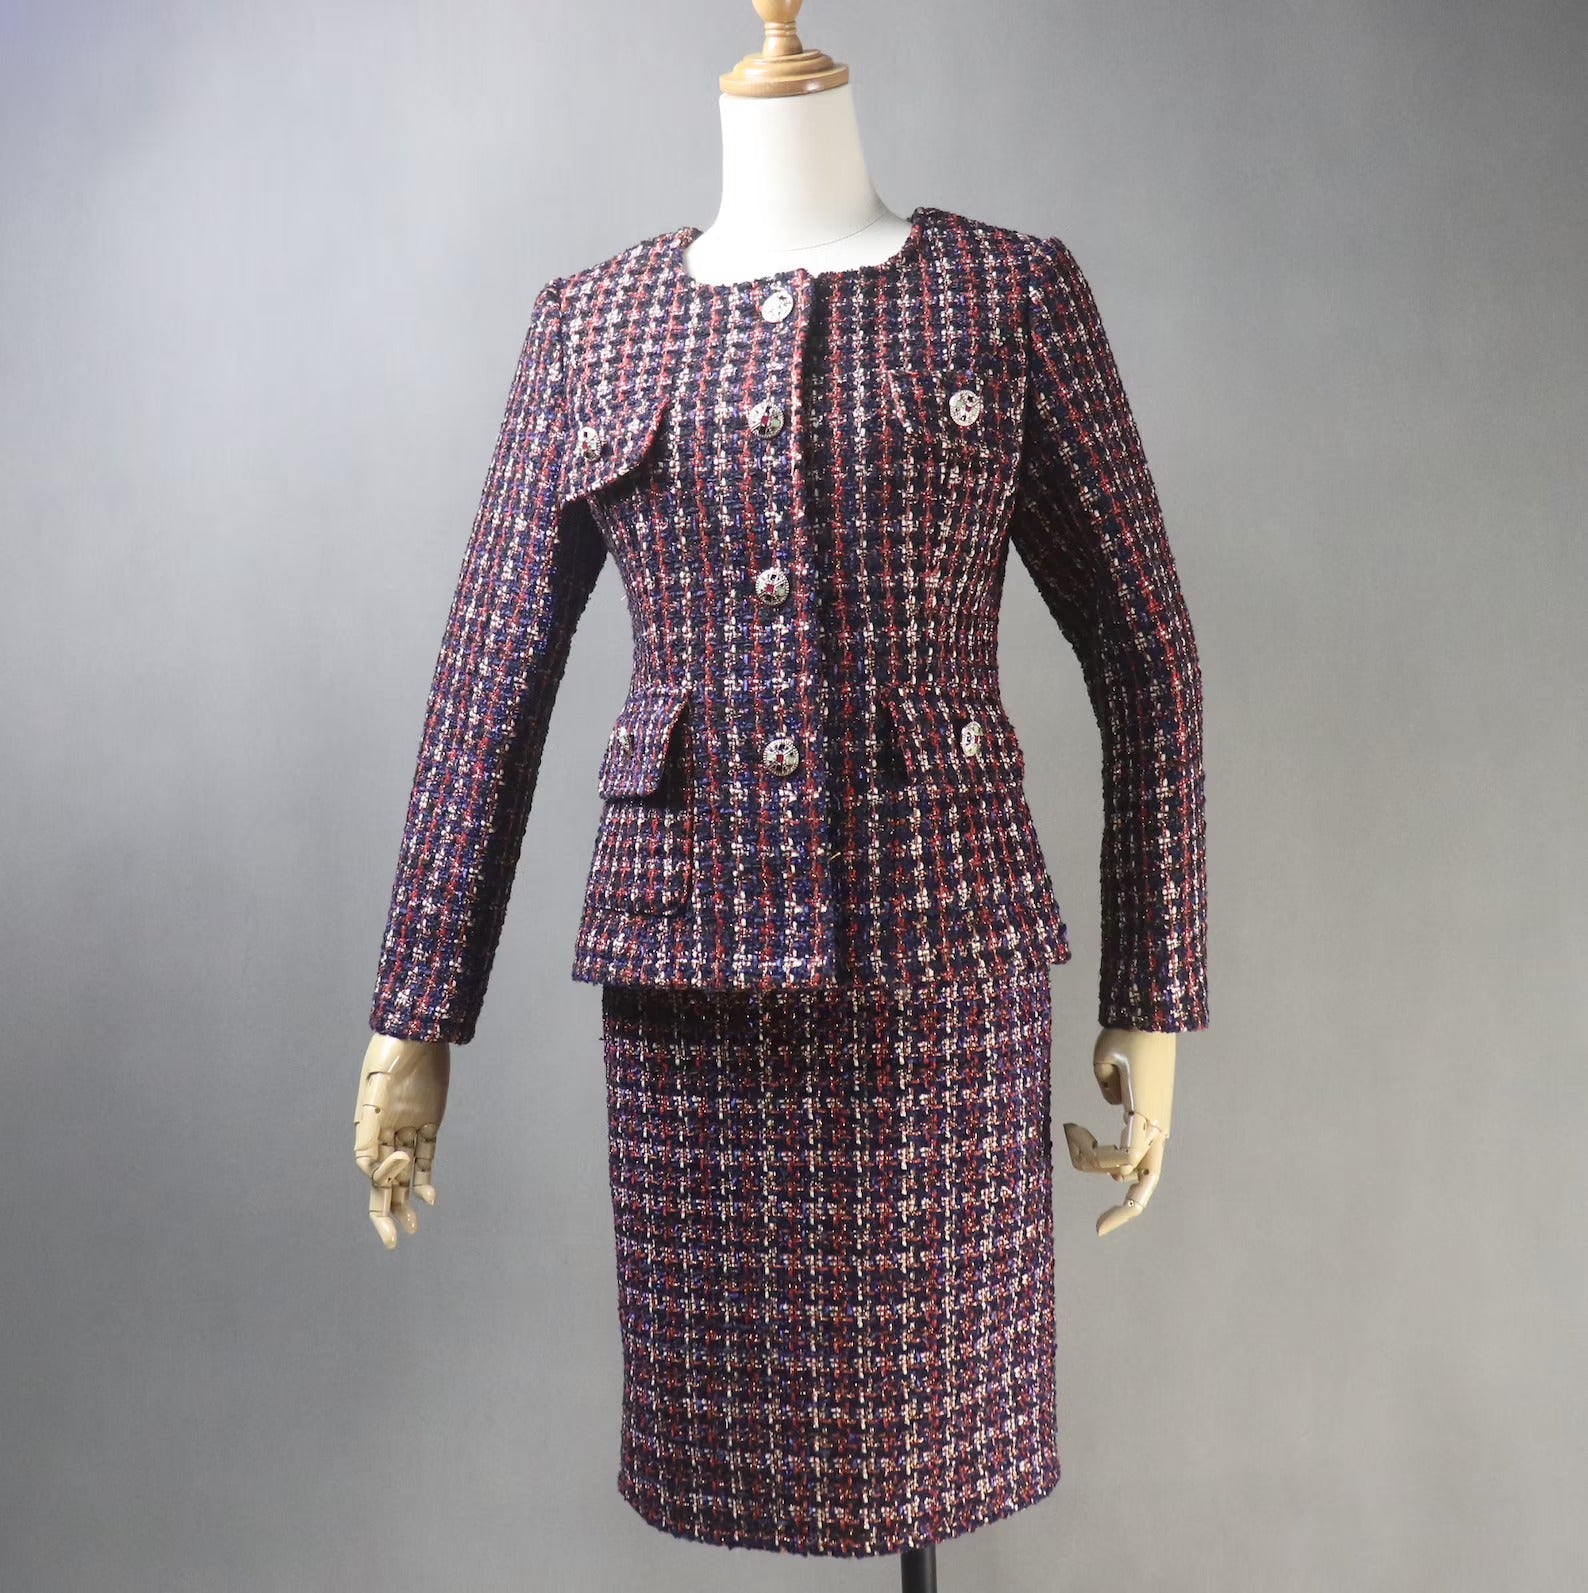 Tailored Women's Dark Red Checked Jacket Coat with Skirt  UK CUSTOMER SERVICE!   Tailored Women's Dark Red Checked Jacket Coat with Skirt-  Red checked suits with pant and jeans. Designed with front pocket and silver buttons. Tweed fabric. Dry clean and no machine wash. Can worn for ceremony, college Inauguration , Party, Night Out and Evening Friends with Dinner. No Machine washable. We offer Shorts, Skirts, Trousers for the suit. "Black Sheath dress and Jacket was sold separately".